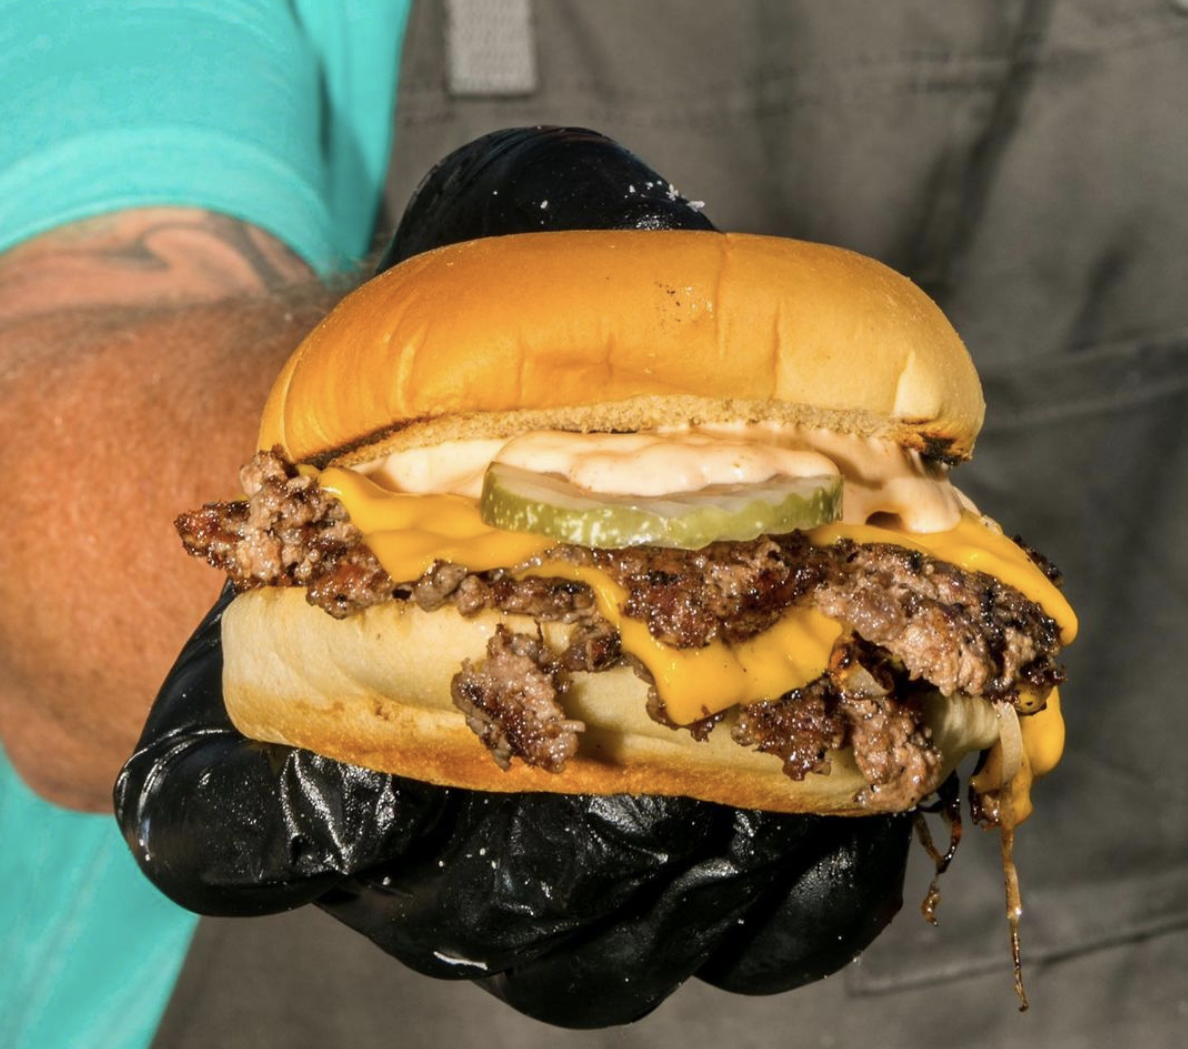 A hand in a black glove holds out a messy cheeseburger.